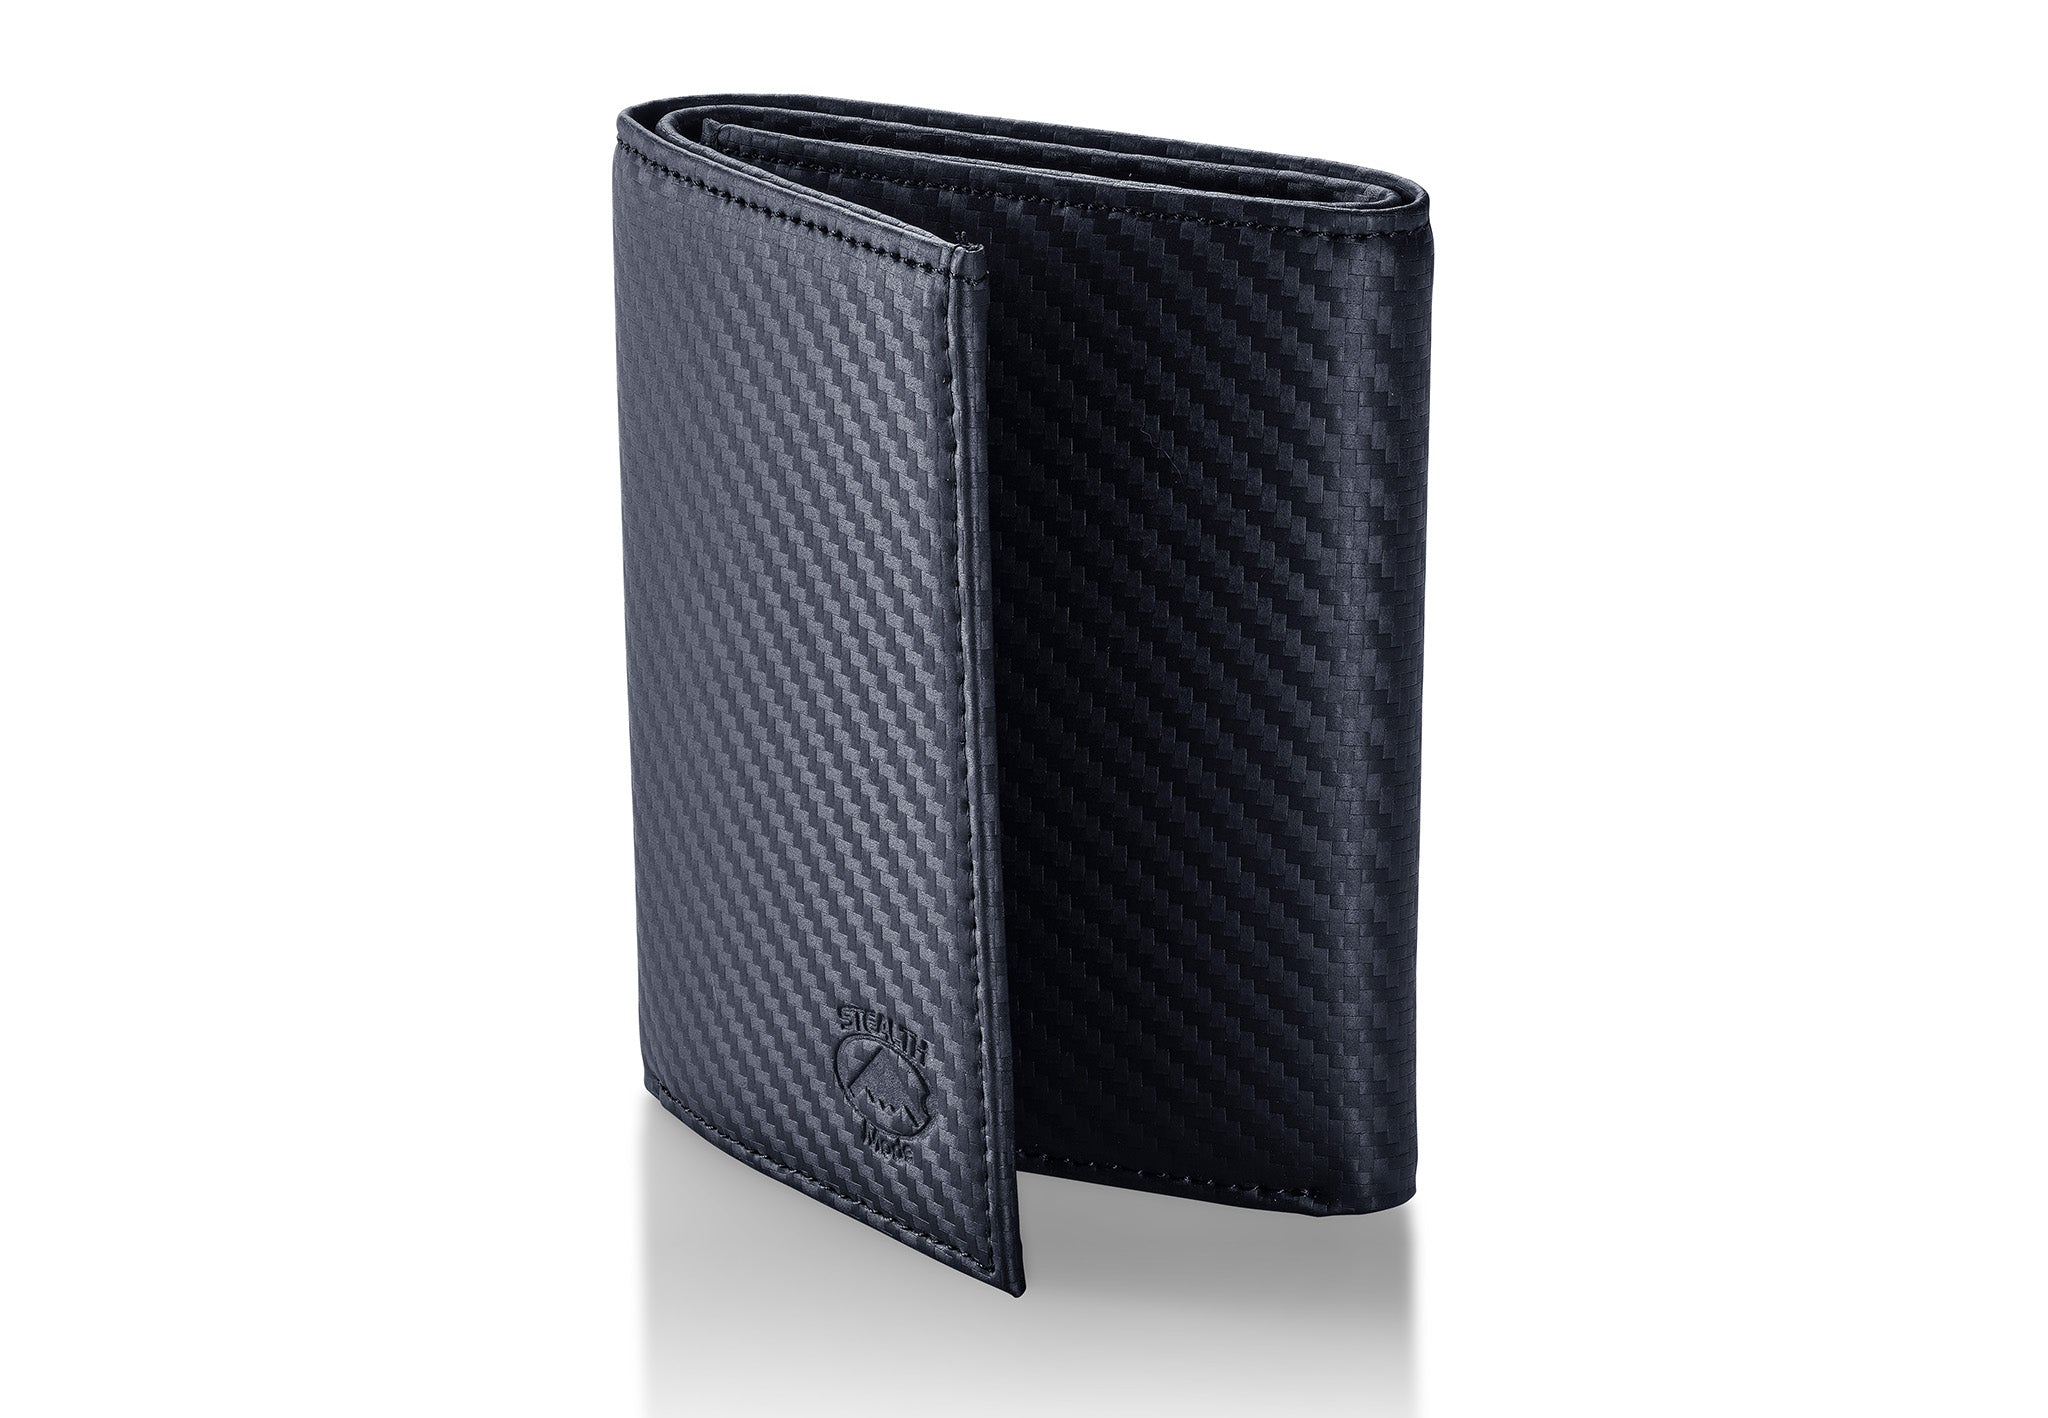 Carbon Fiber Trifold RFID Wallet For Men With Flip Out ID Holder